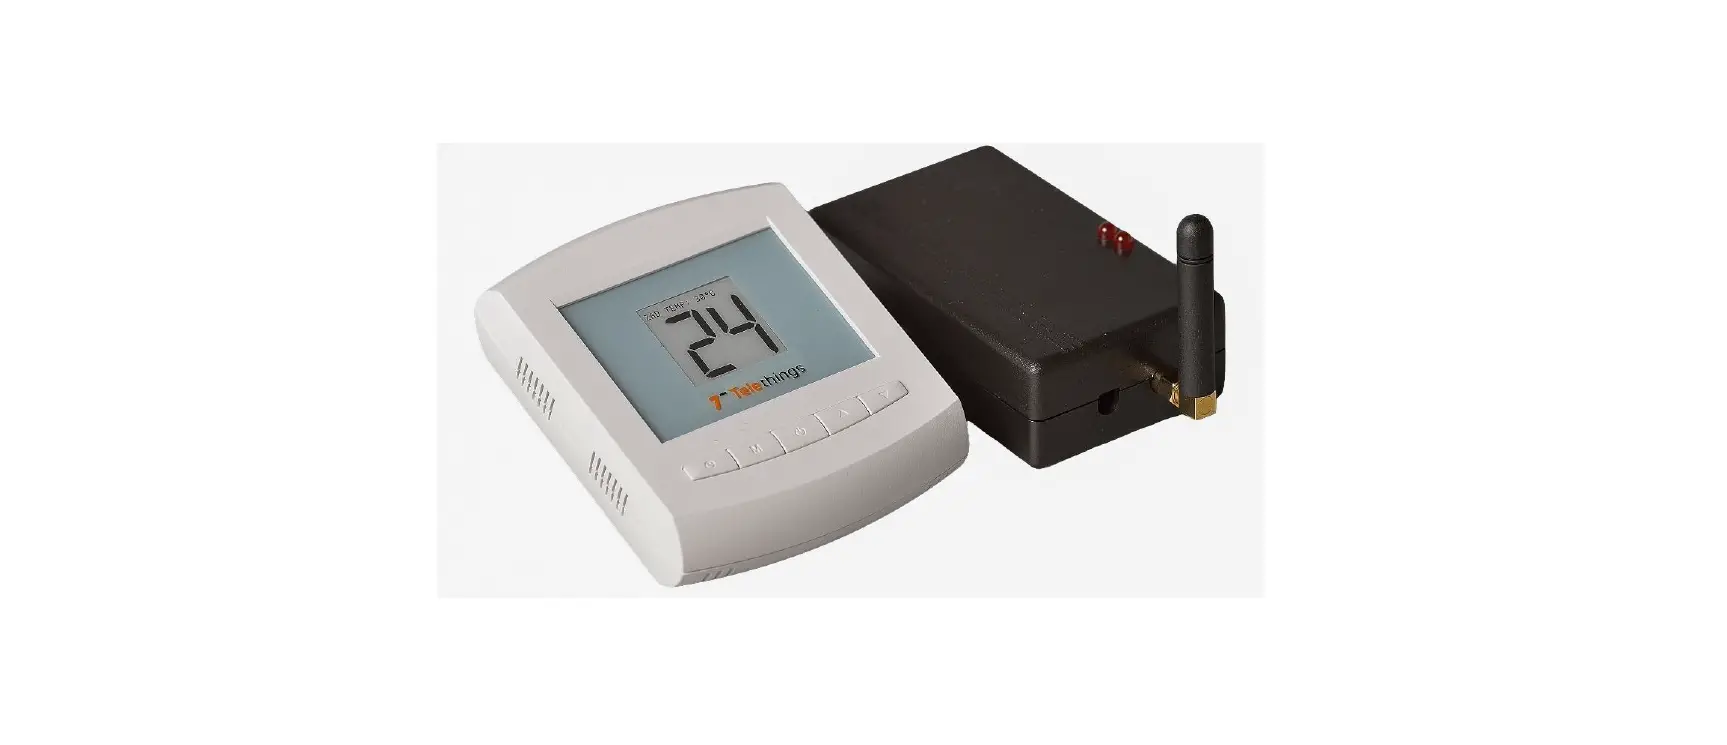 Control Box and Home Sensor Thermometer